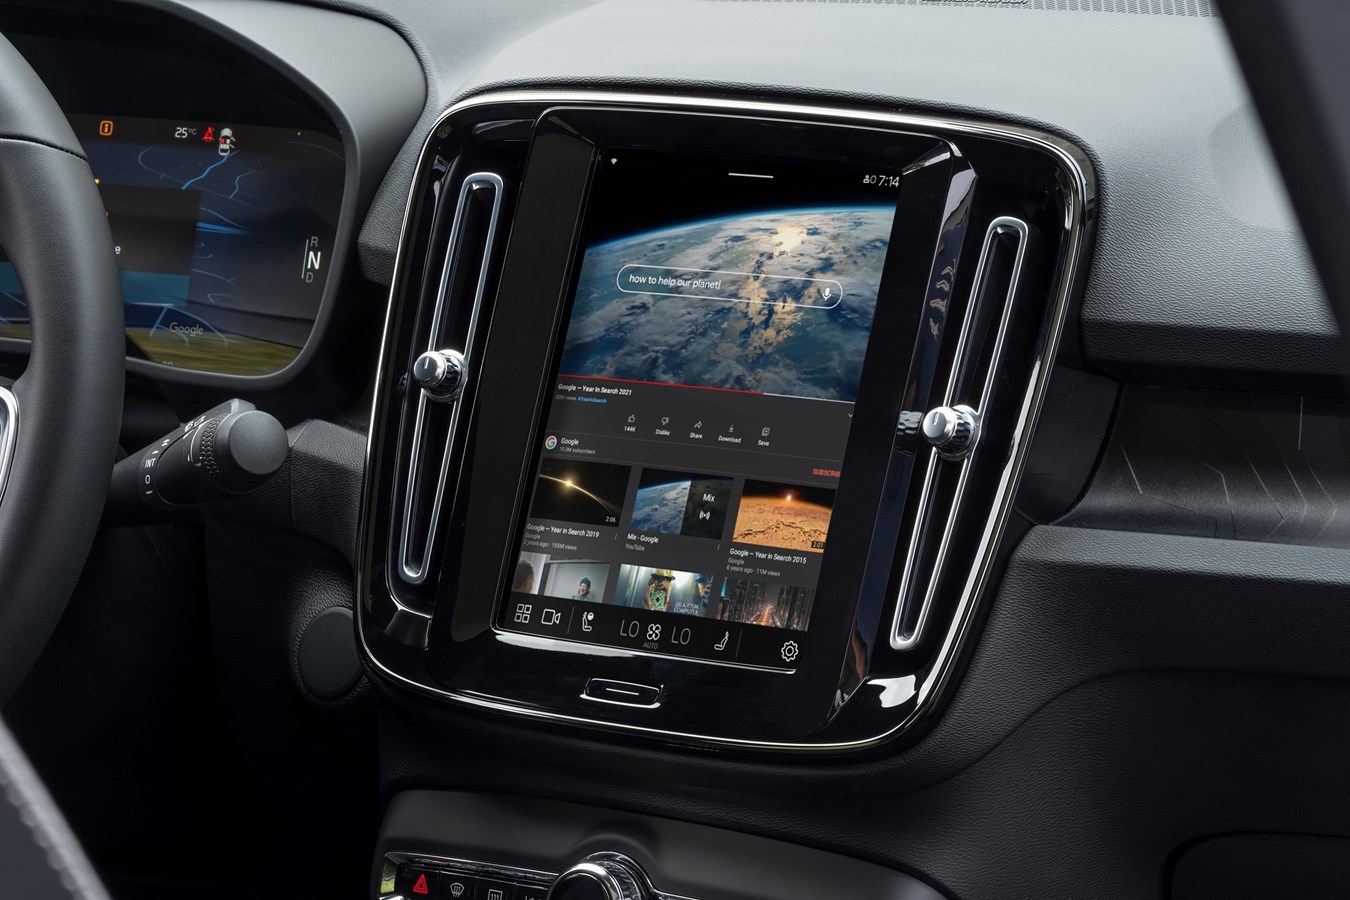 Now Volvo Cars-Google Partnership Offers YouTube Video Playback in All Volvo Cars with Google Built-In